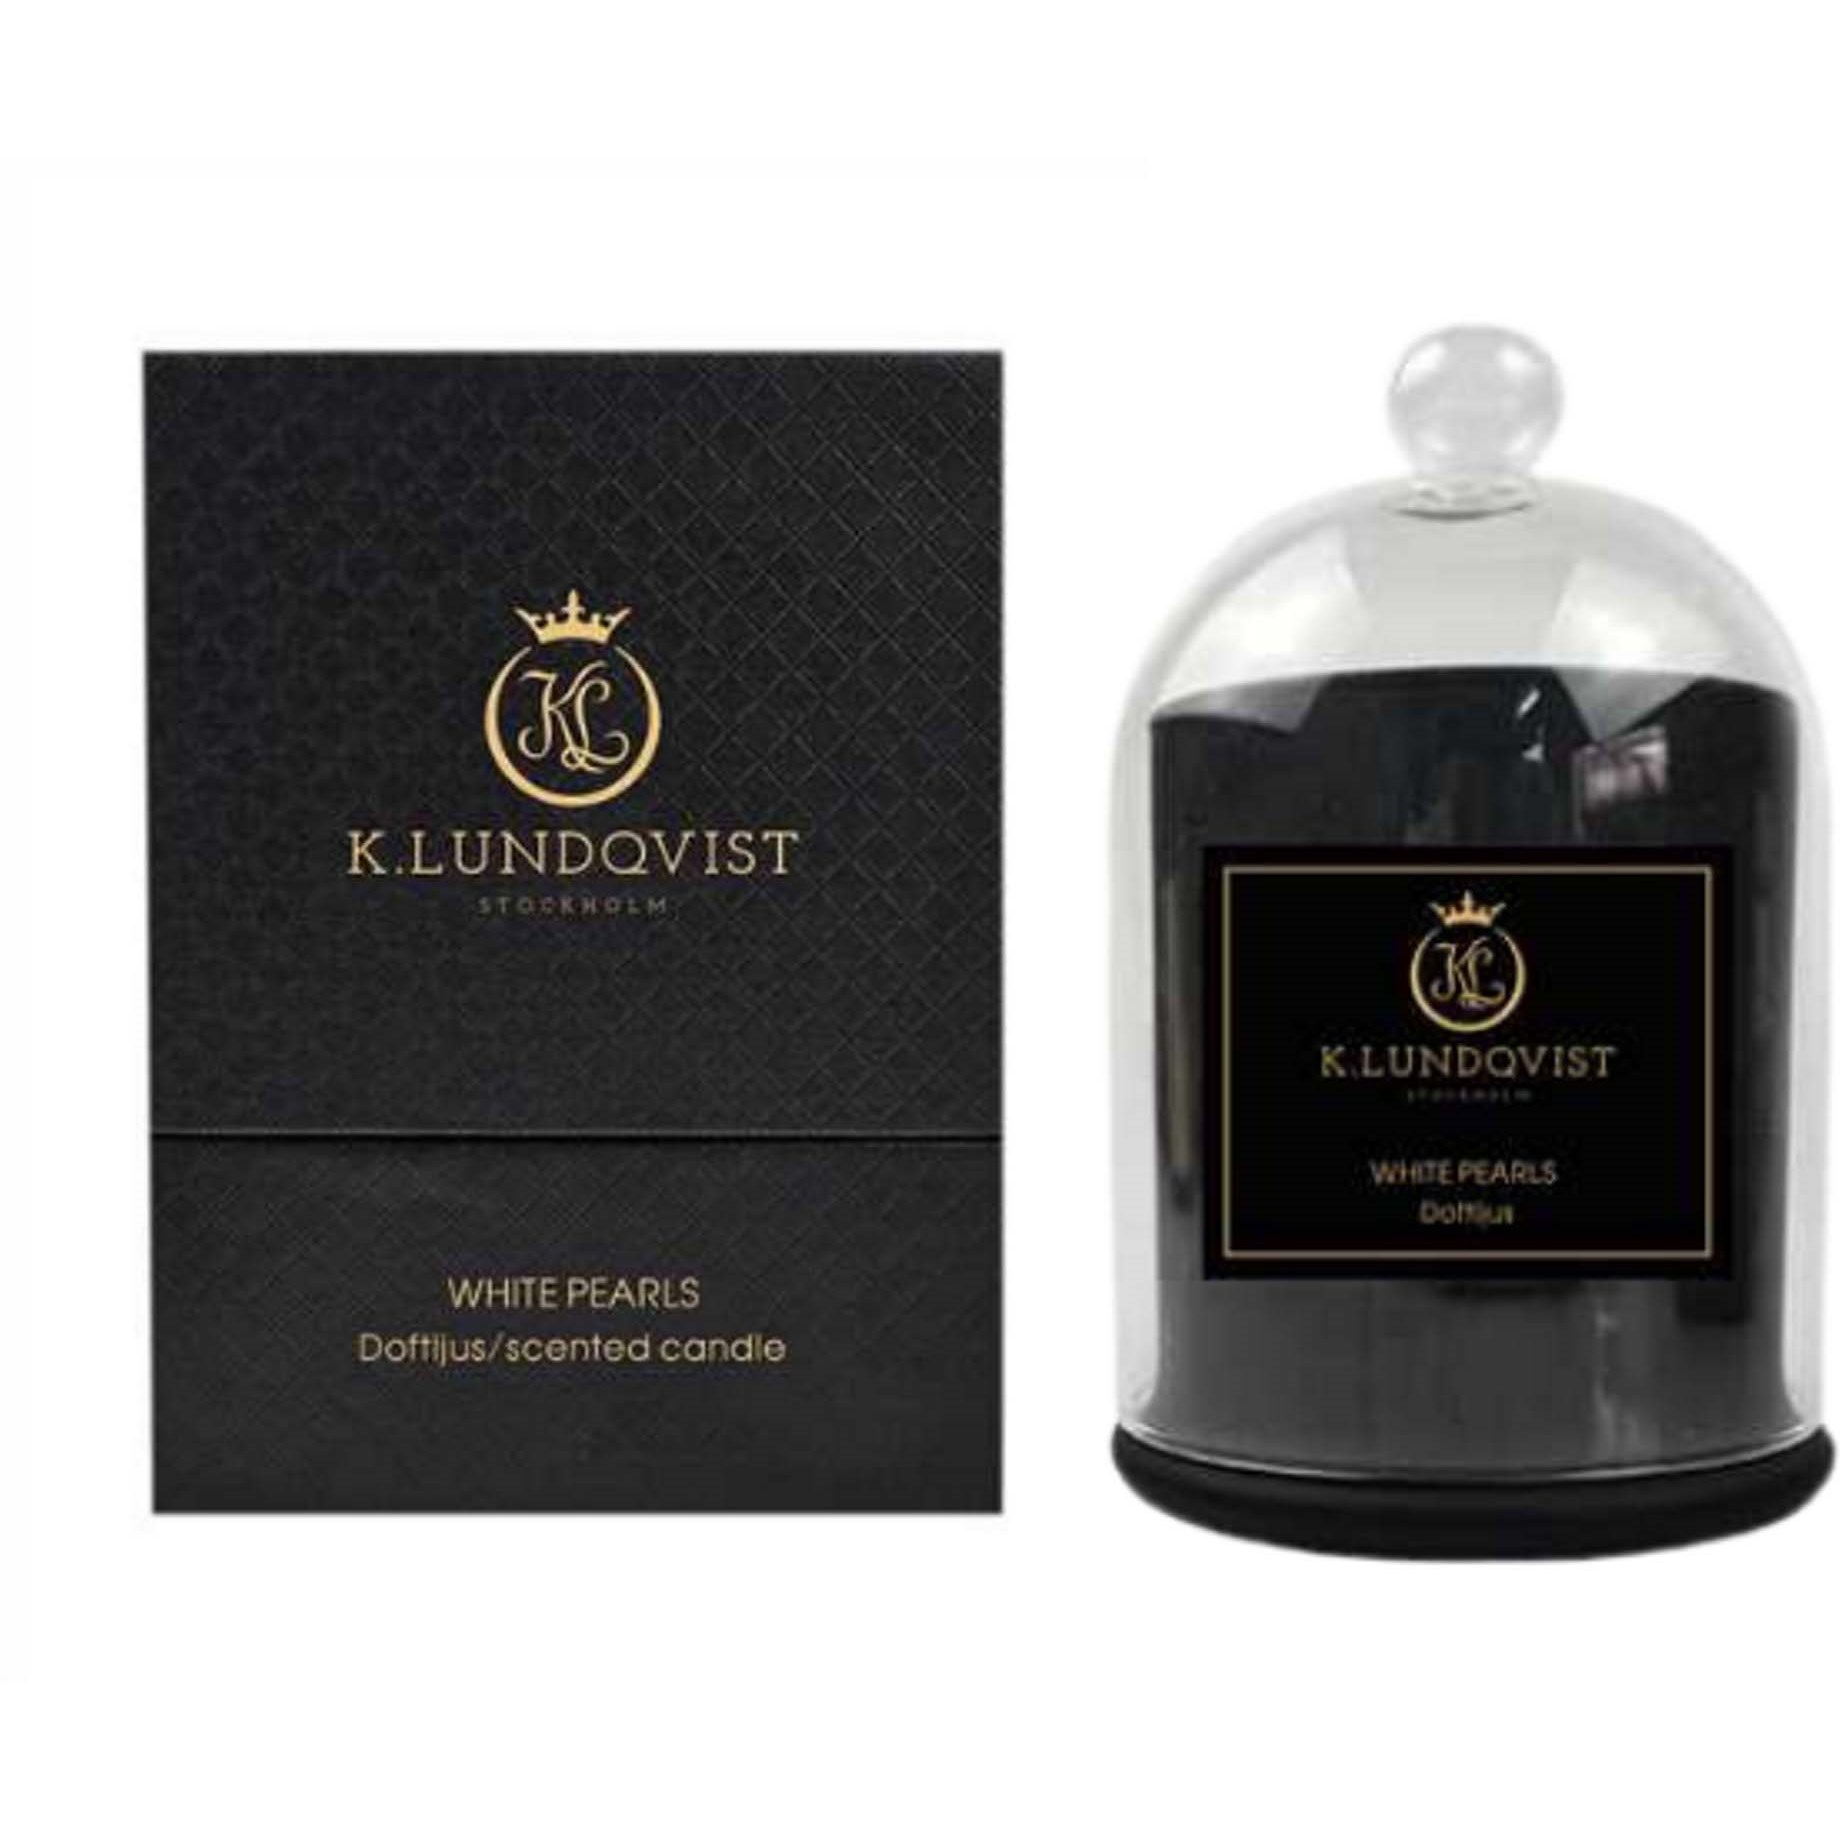 K. Lundqvist Stockholm Scented Candle with Glass Cover White Pearls/Fr